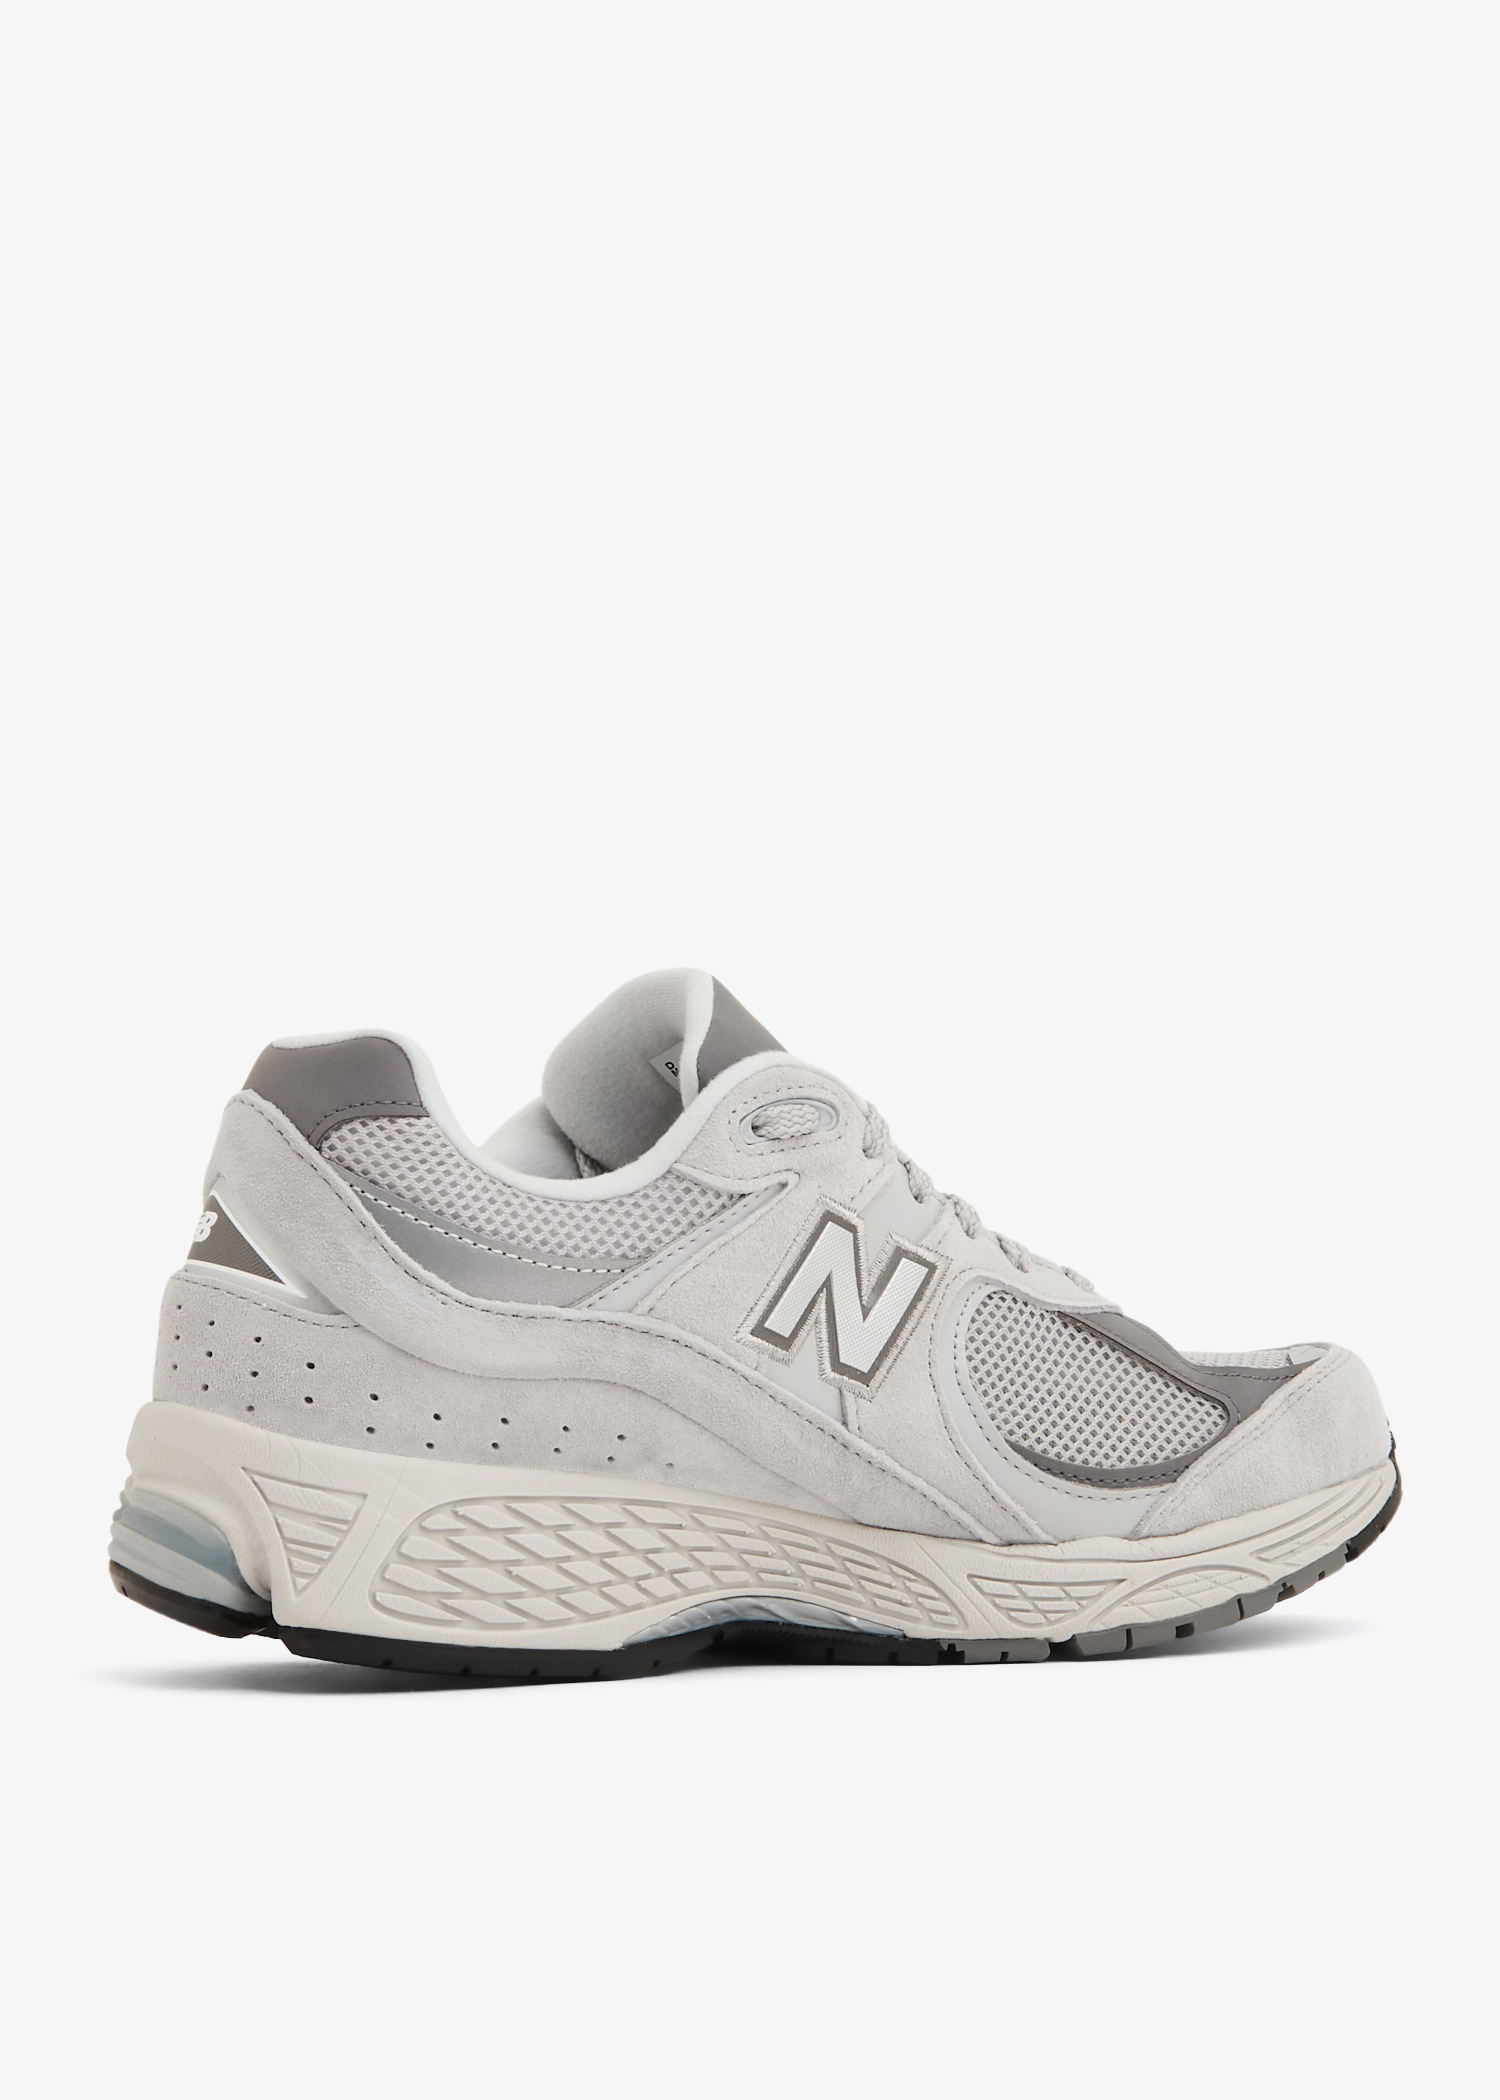 New Balance 2002R sneakers for Men - Grey in KSA | Level Shoes